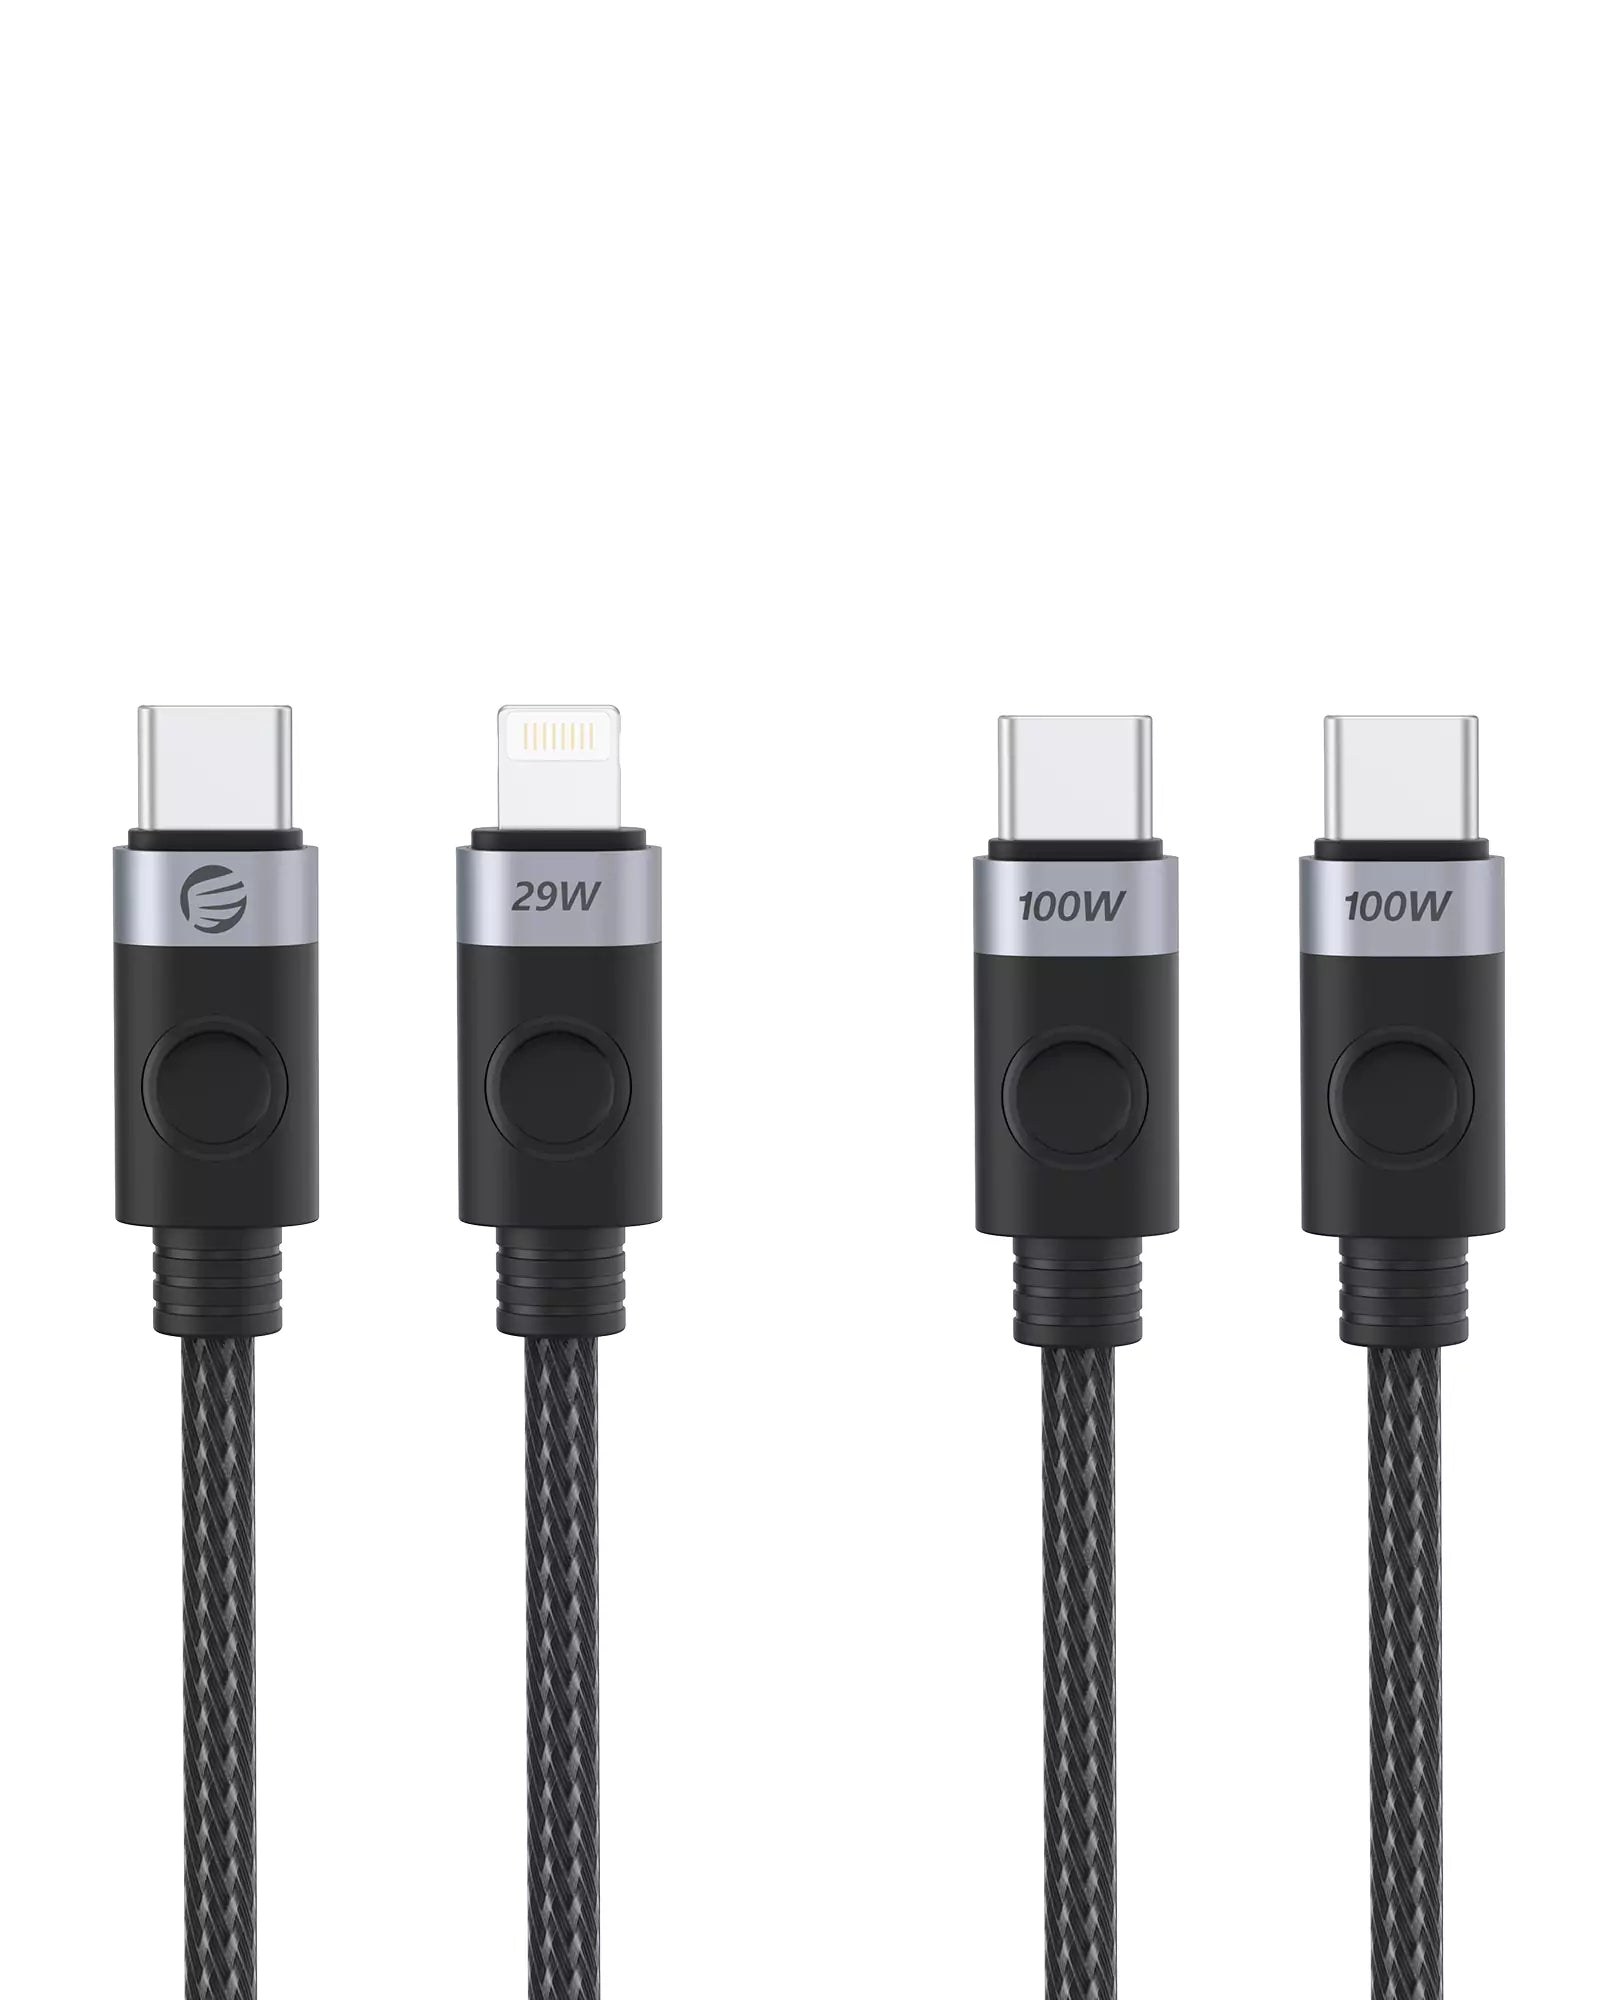 ORICO PD 30W USB C Charger with Type-C to Type-C Cable Set - Fast